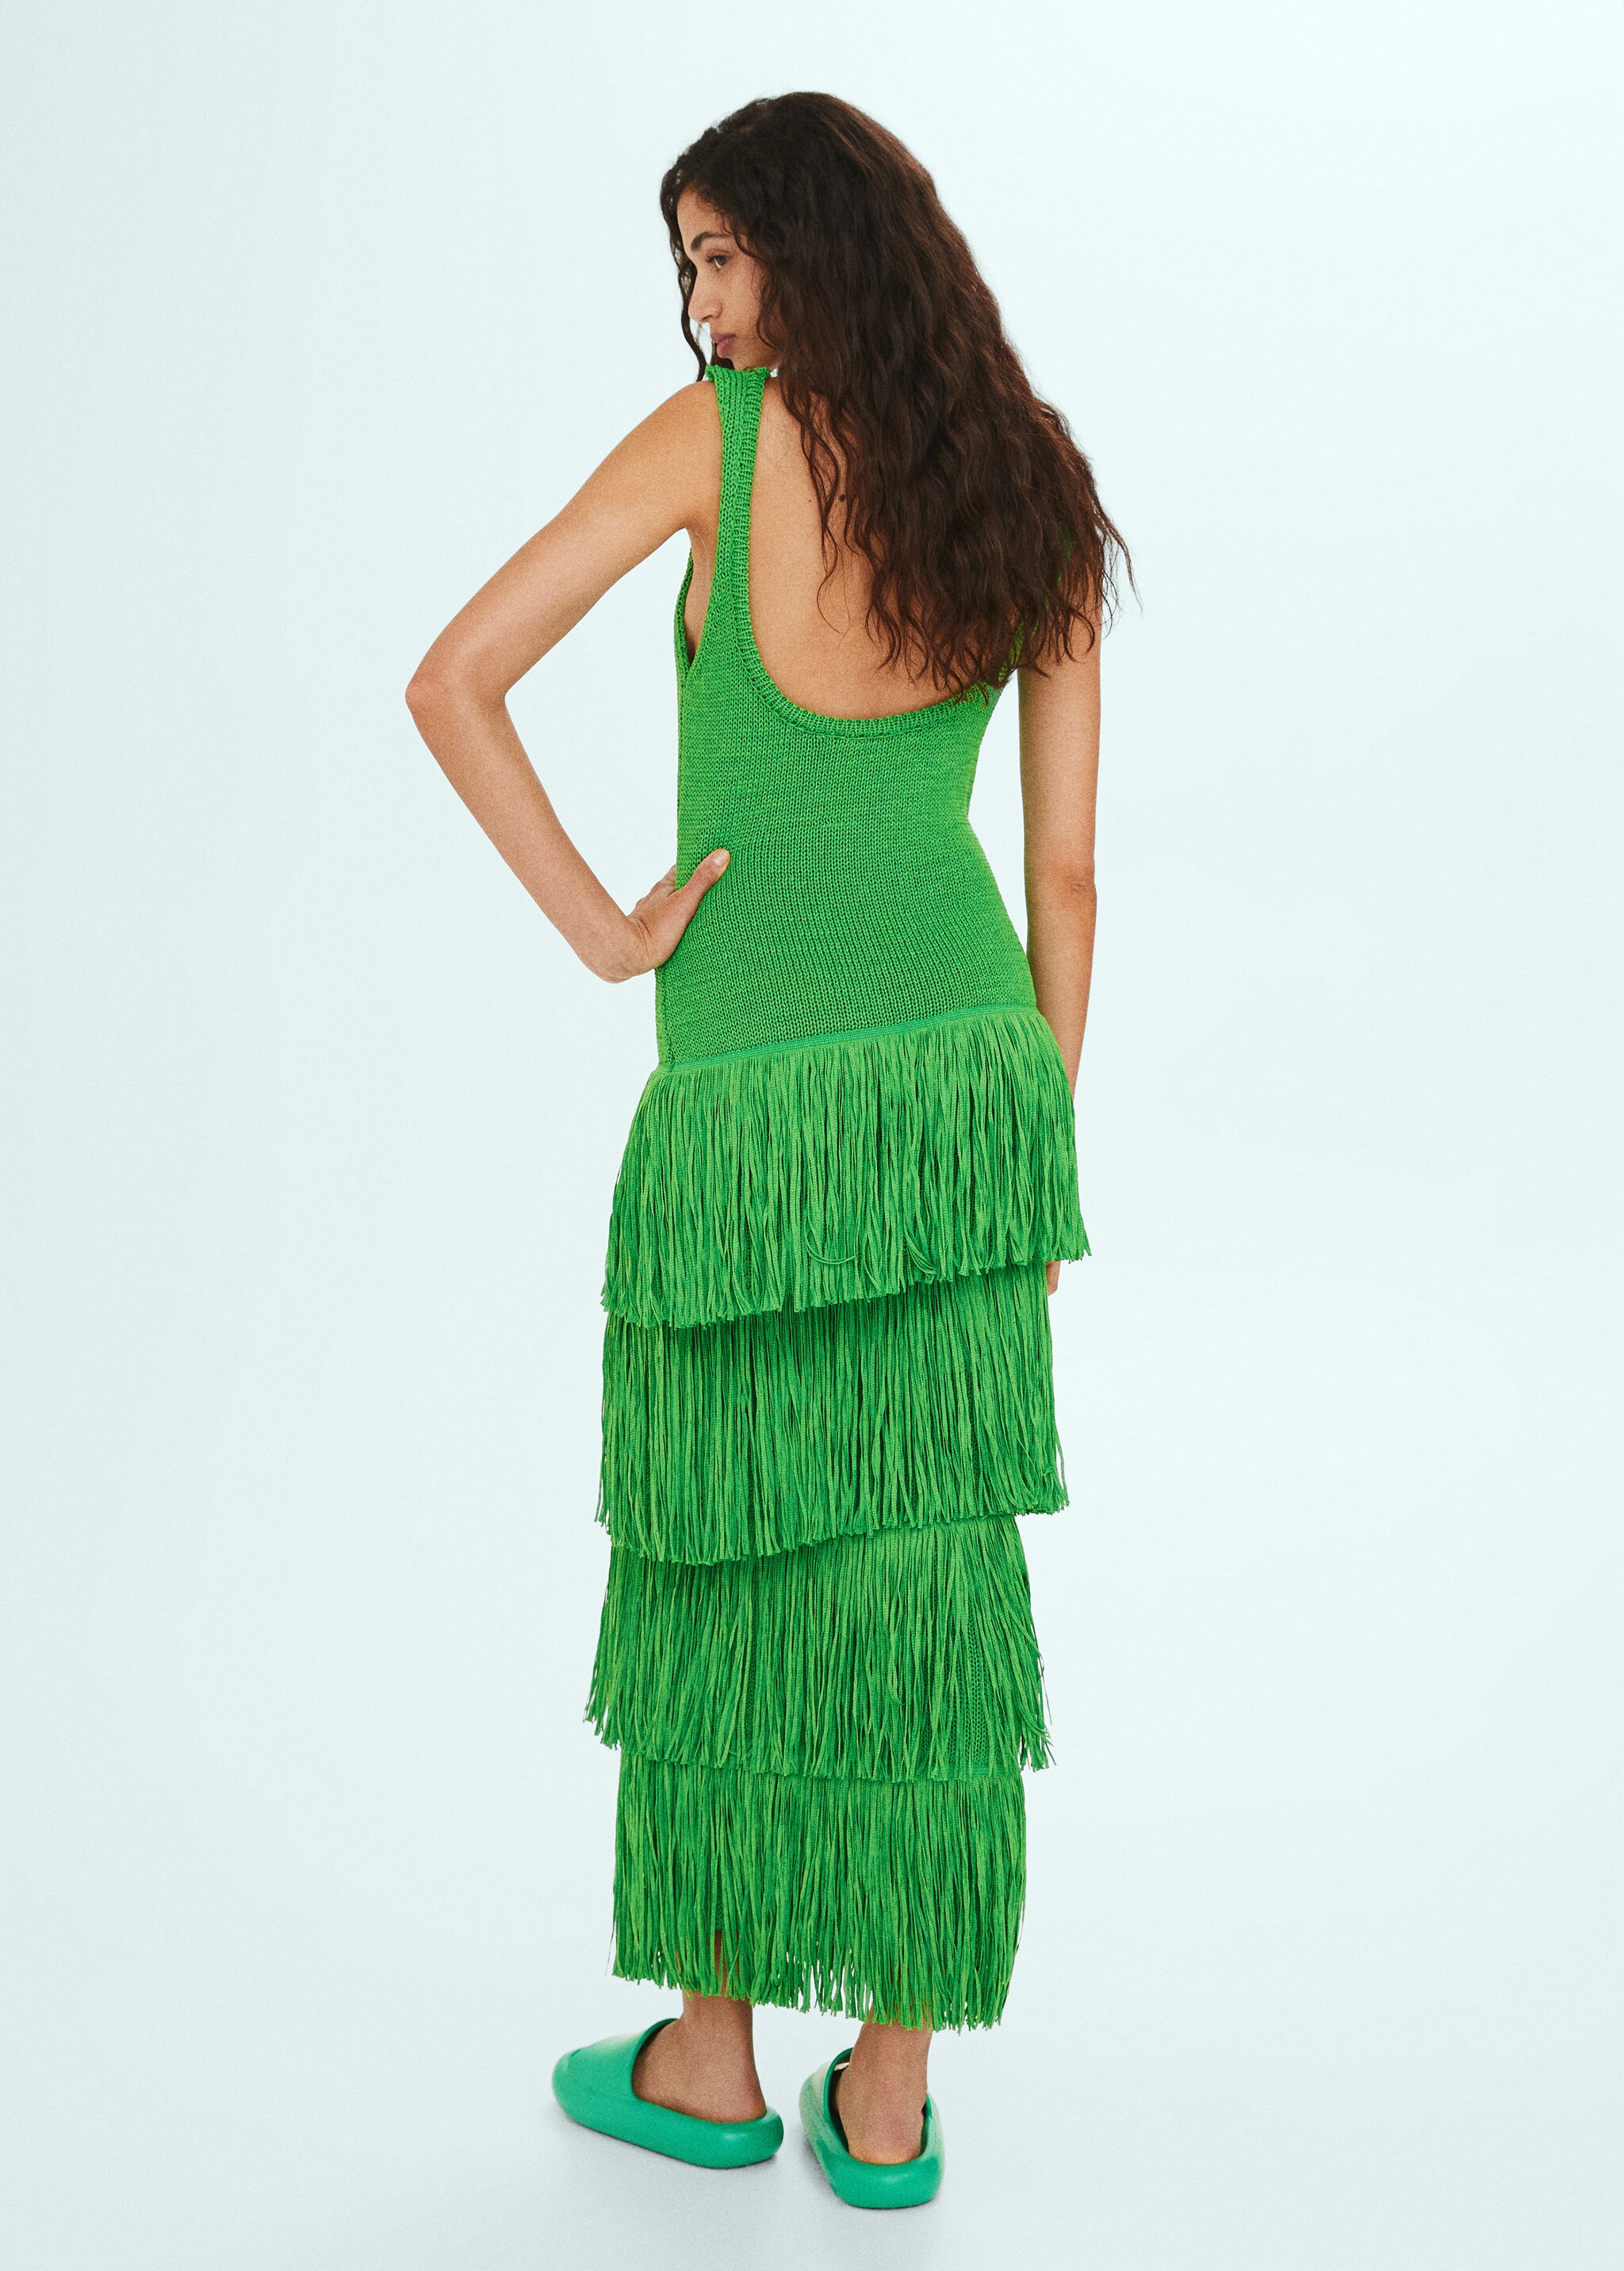 Knitted dress with fringe design - Reverse of the article